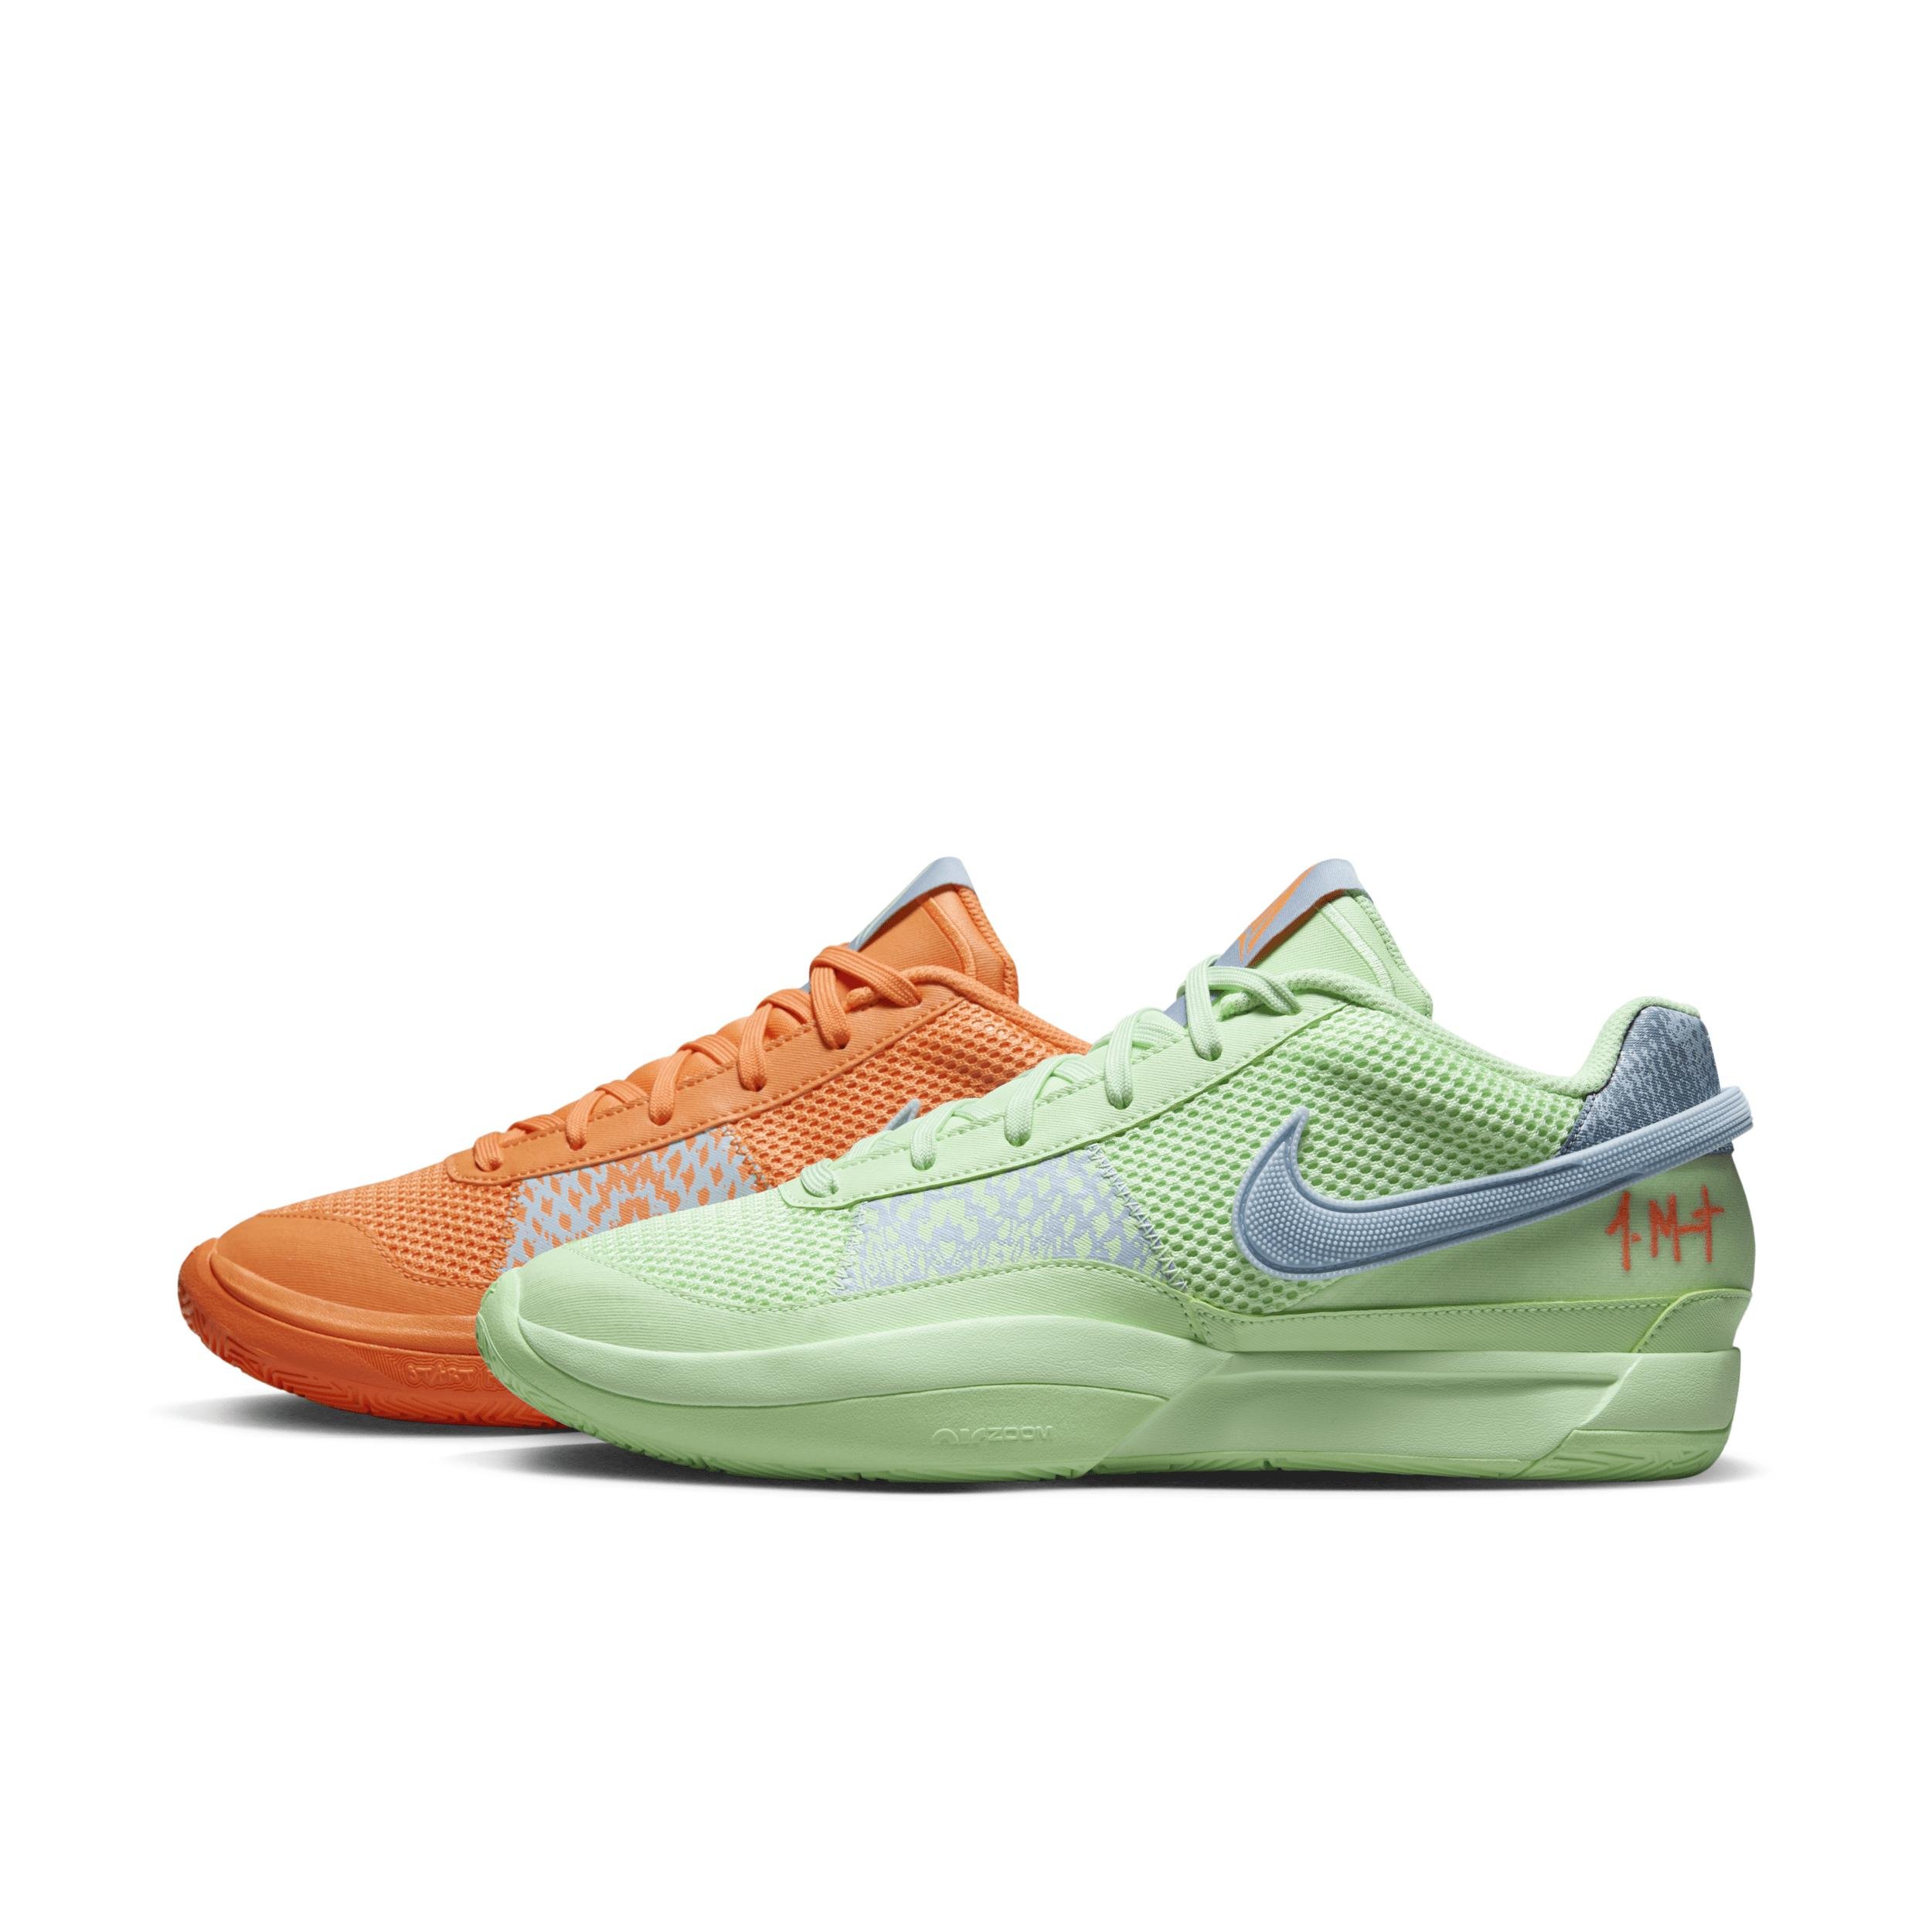 Nike Men's Ja 1 "Day" Basketball Shoes by NIKE